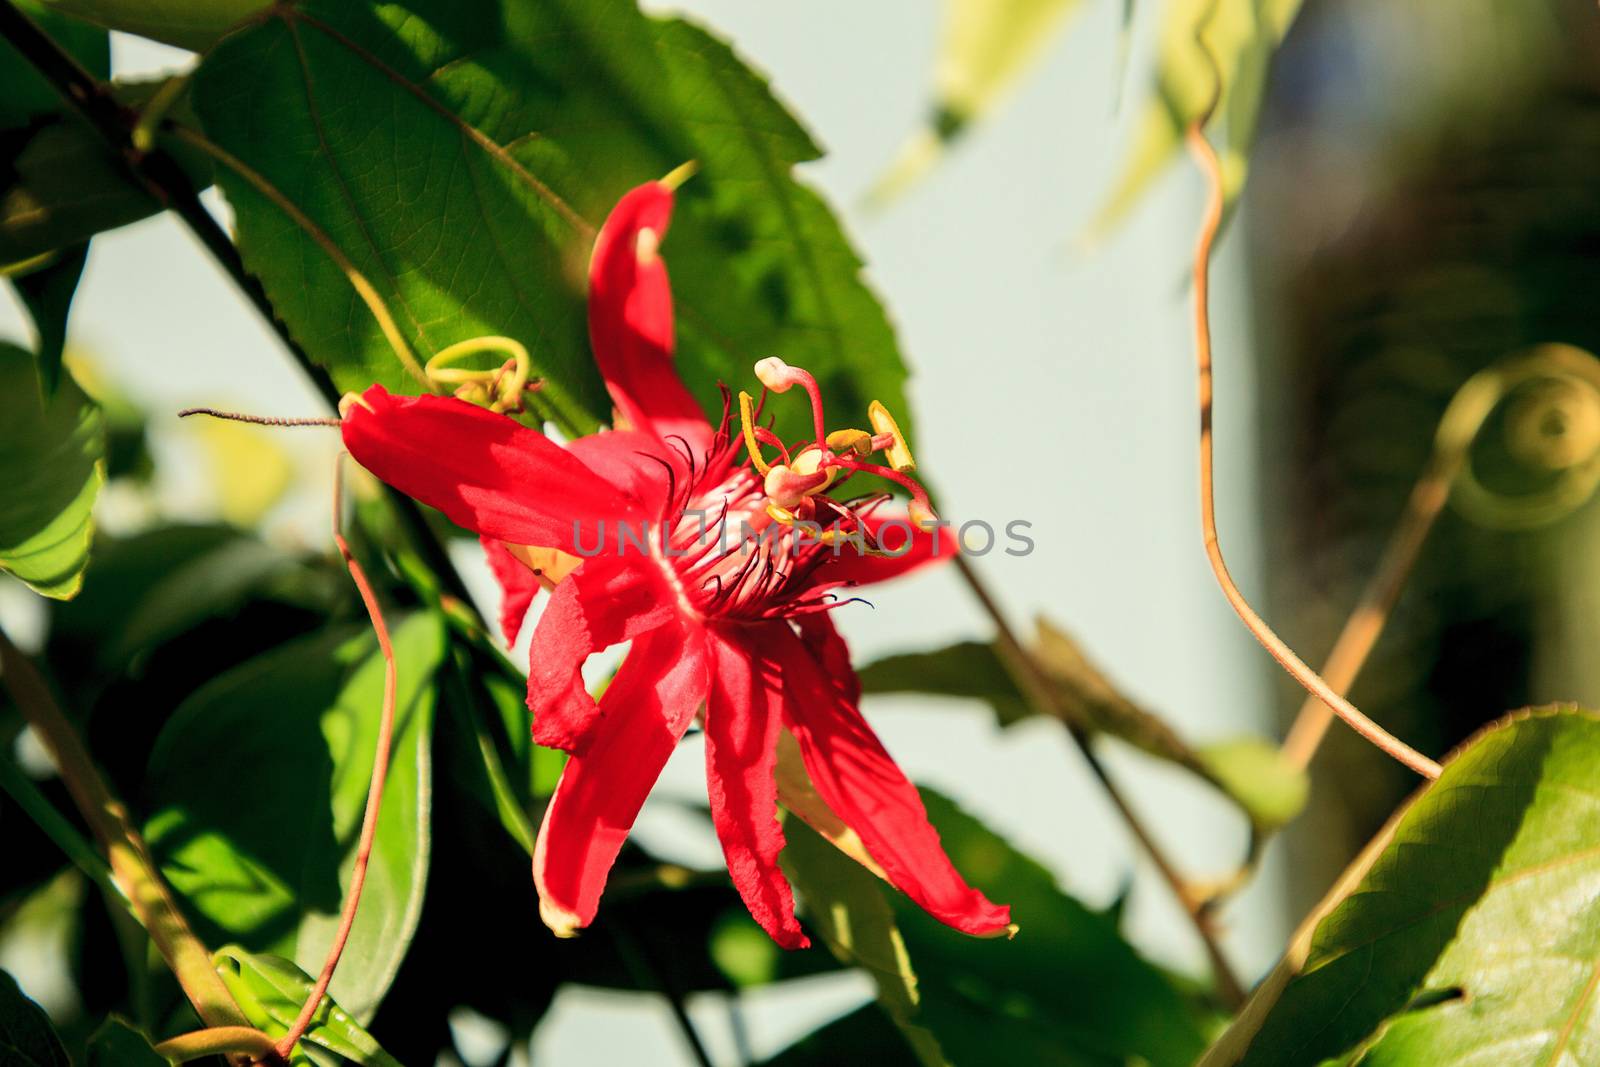 Red scarlet flame passionflower vine by steffstarr